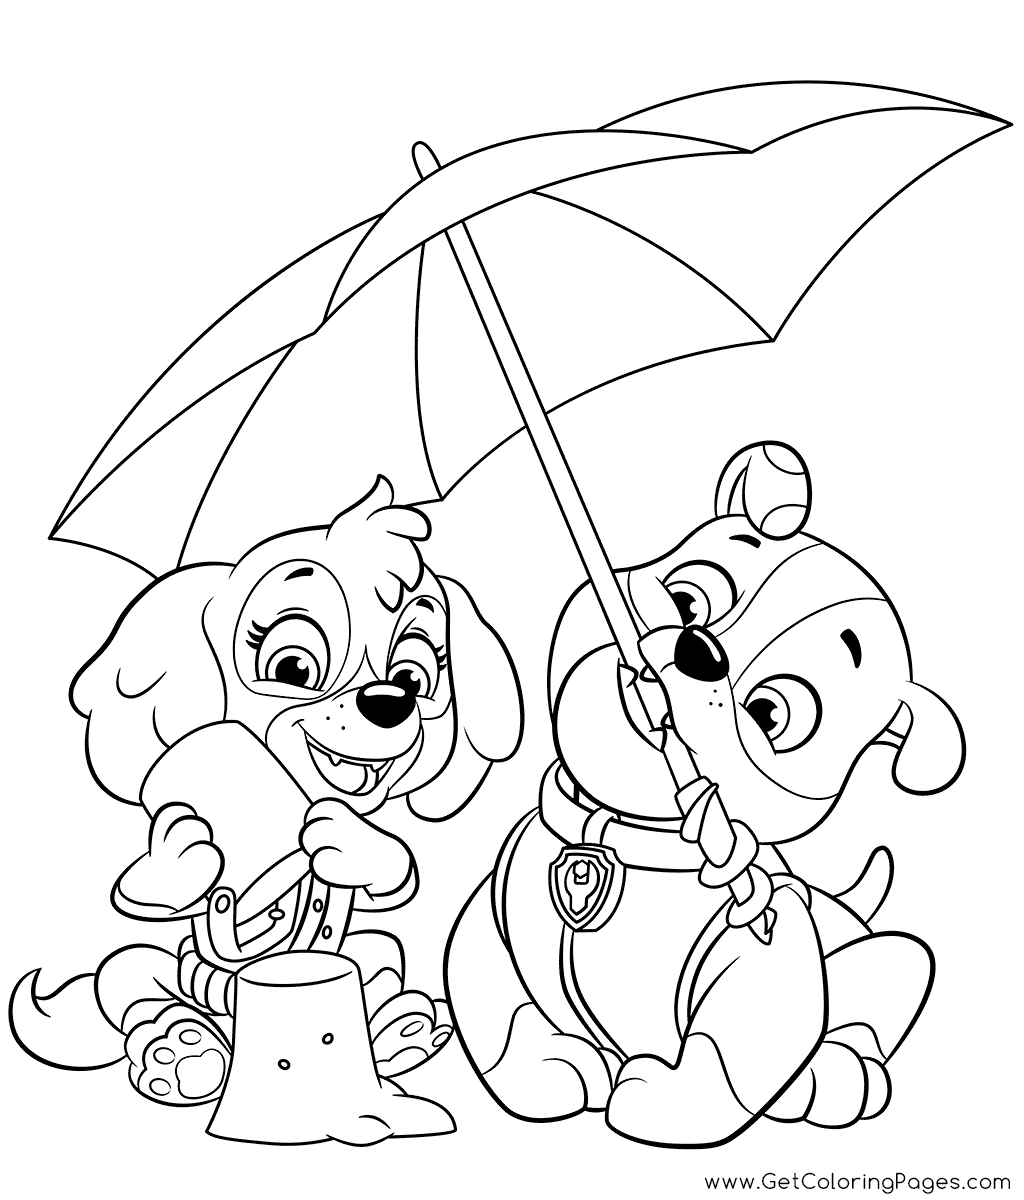 Paw Patrol Rubble and Skye Coloring Pages